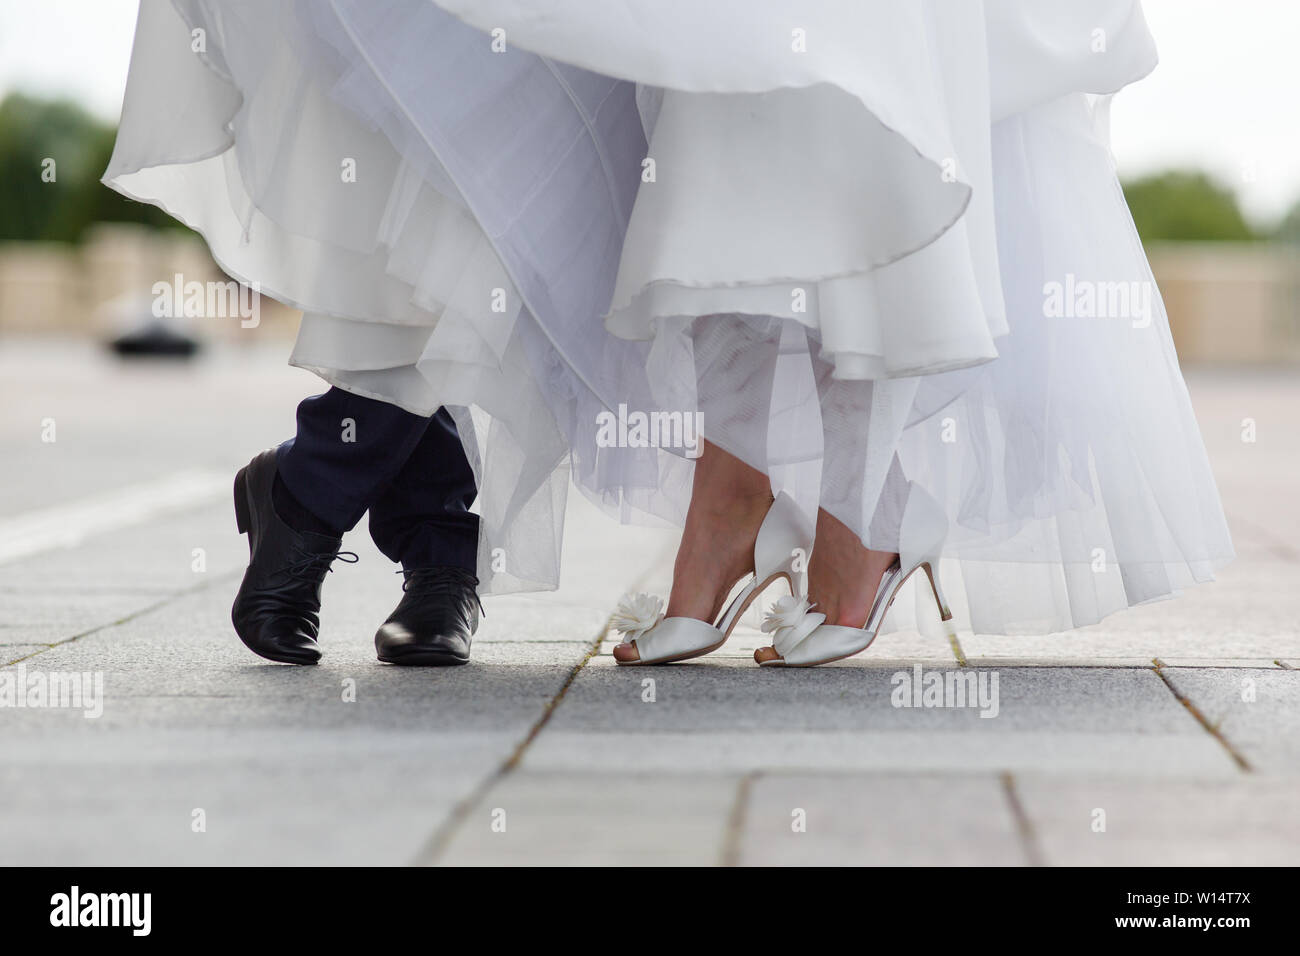 black shoes with wedding dress